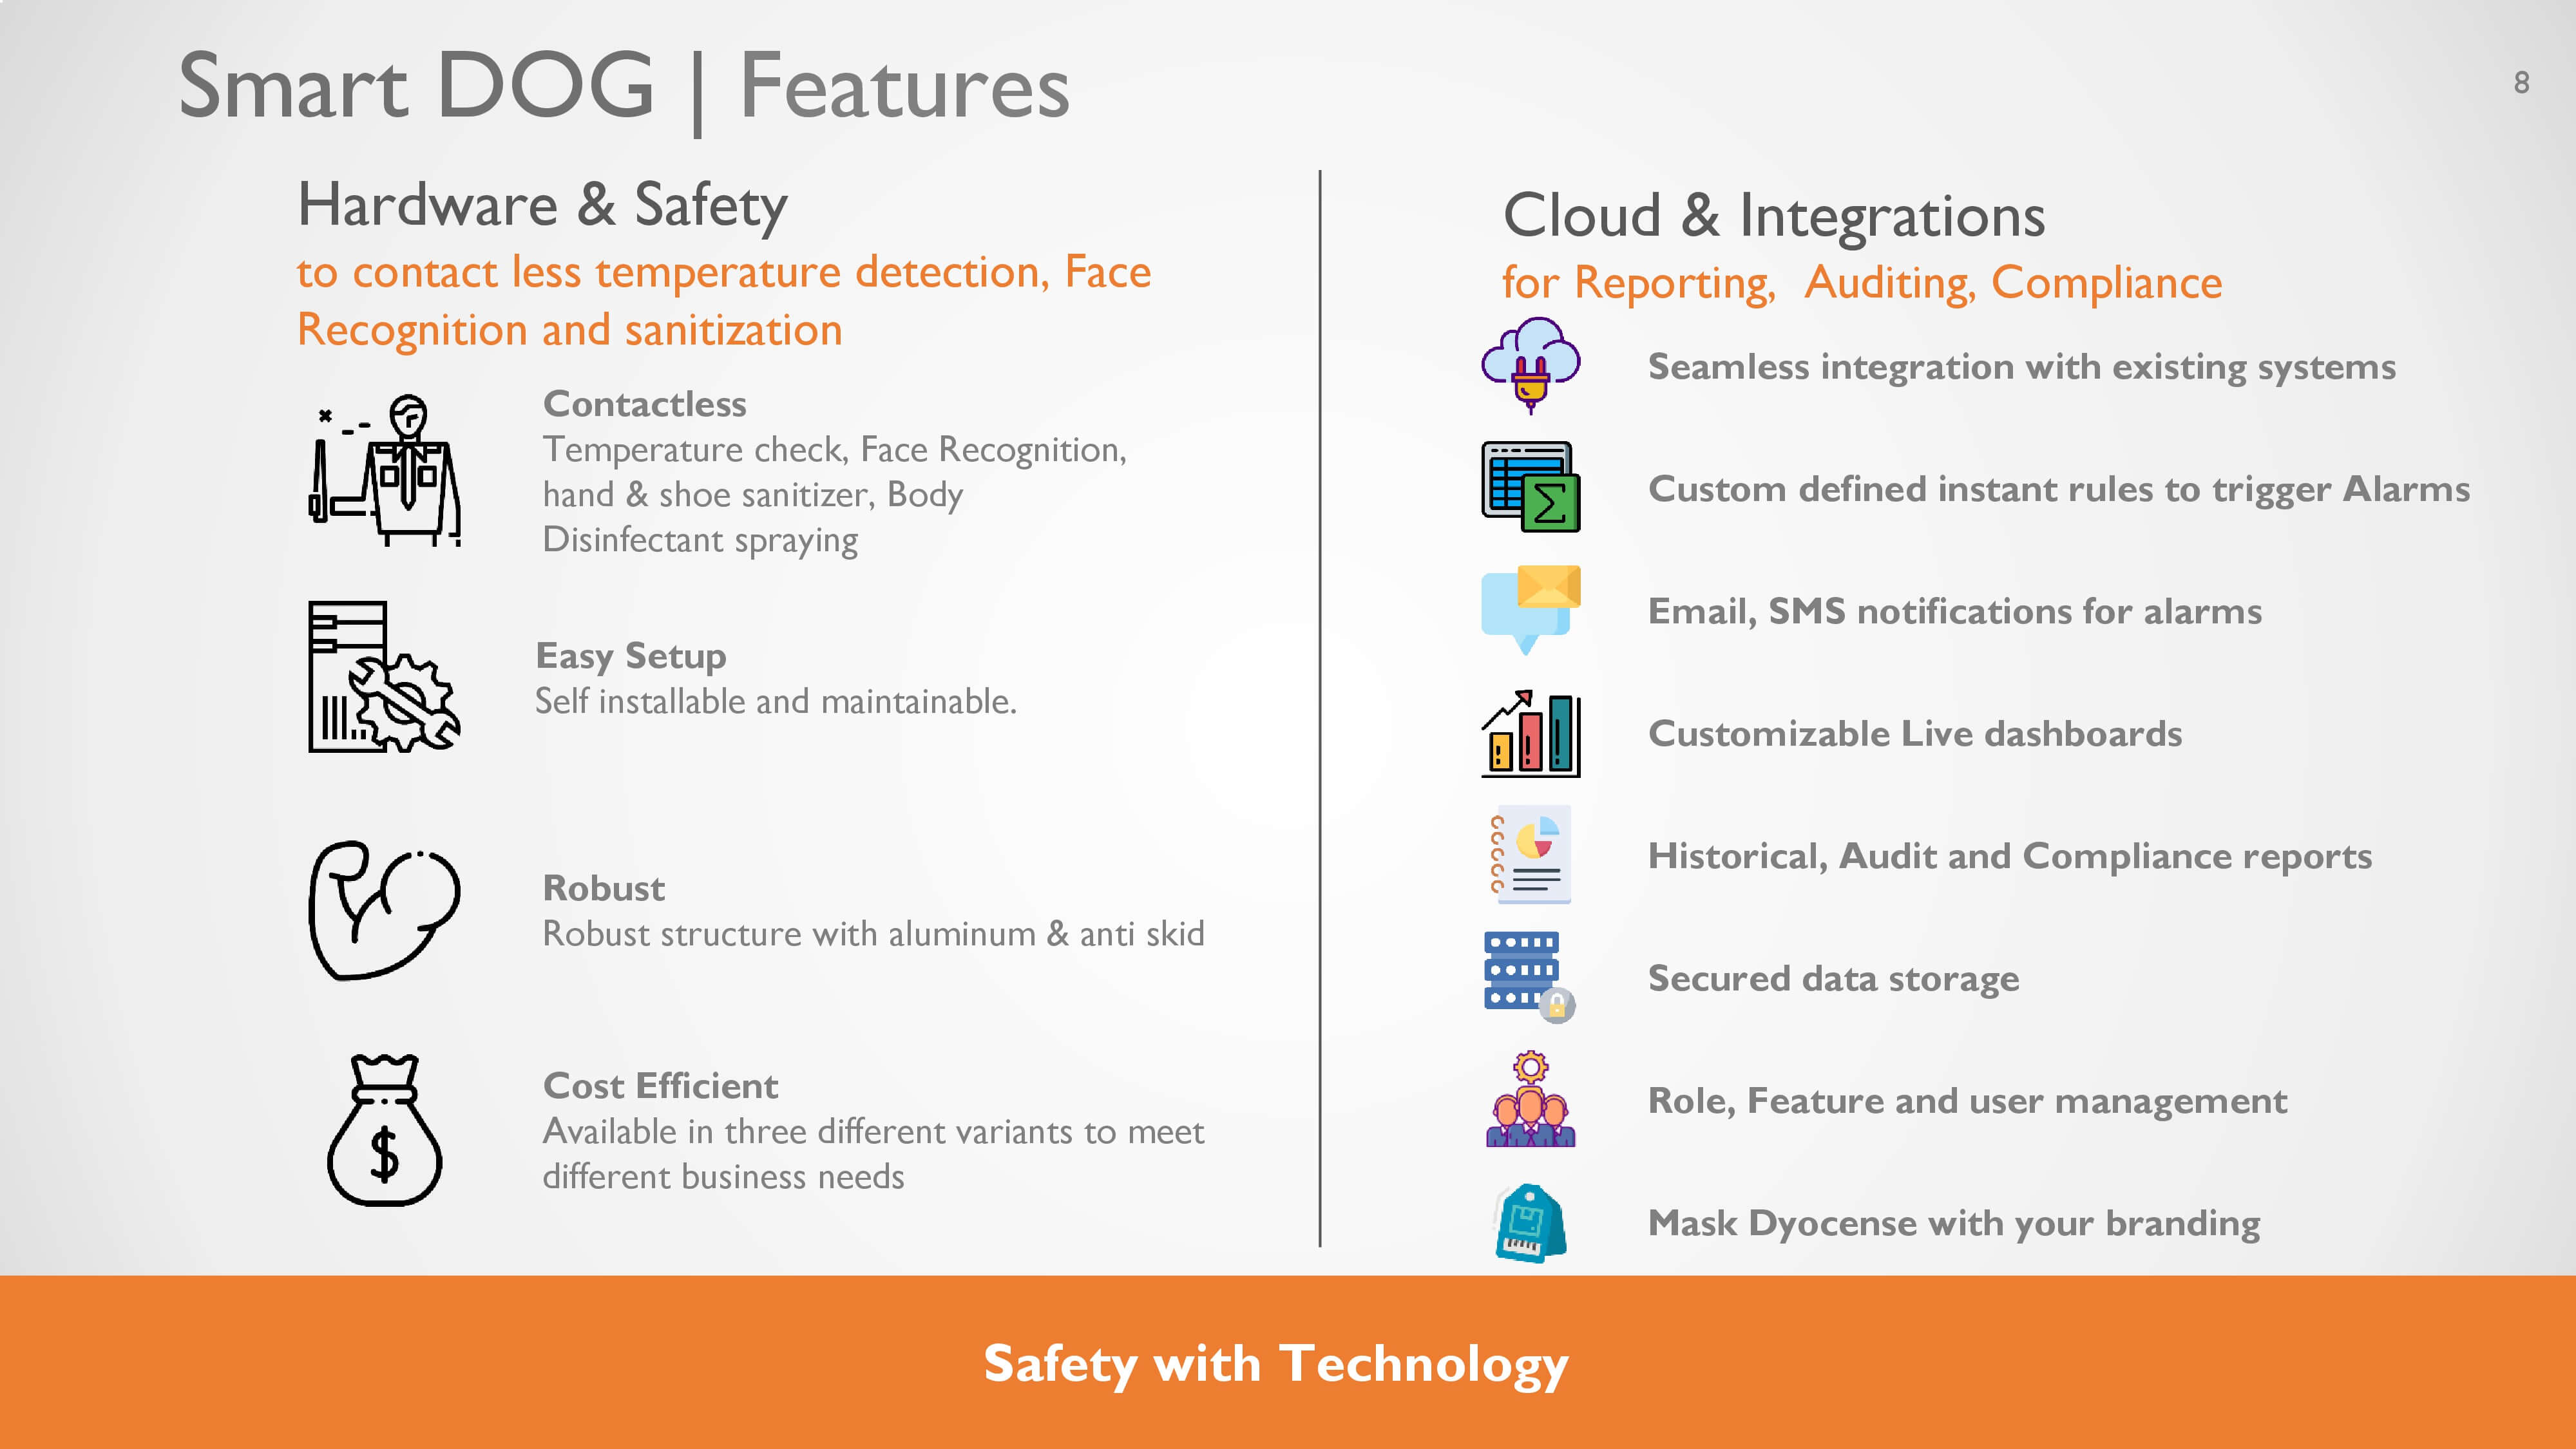 DyoCense IoT smart dog features with Safety and Integrations